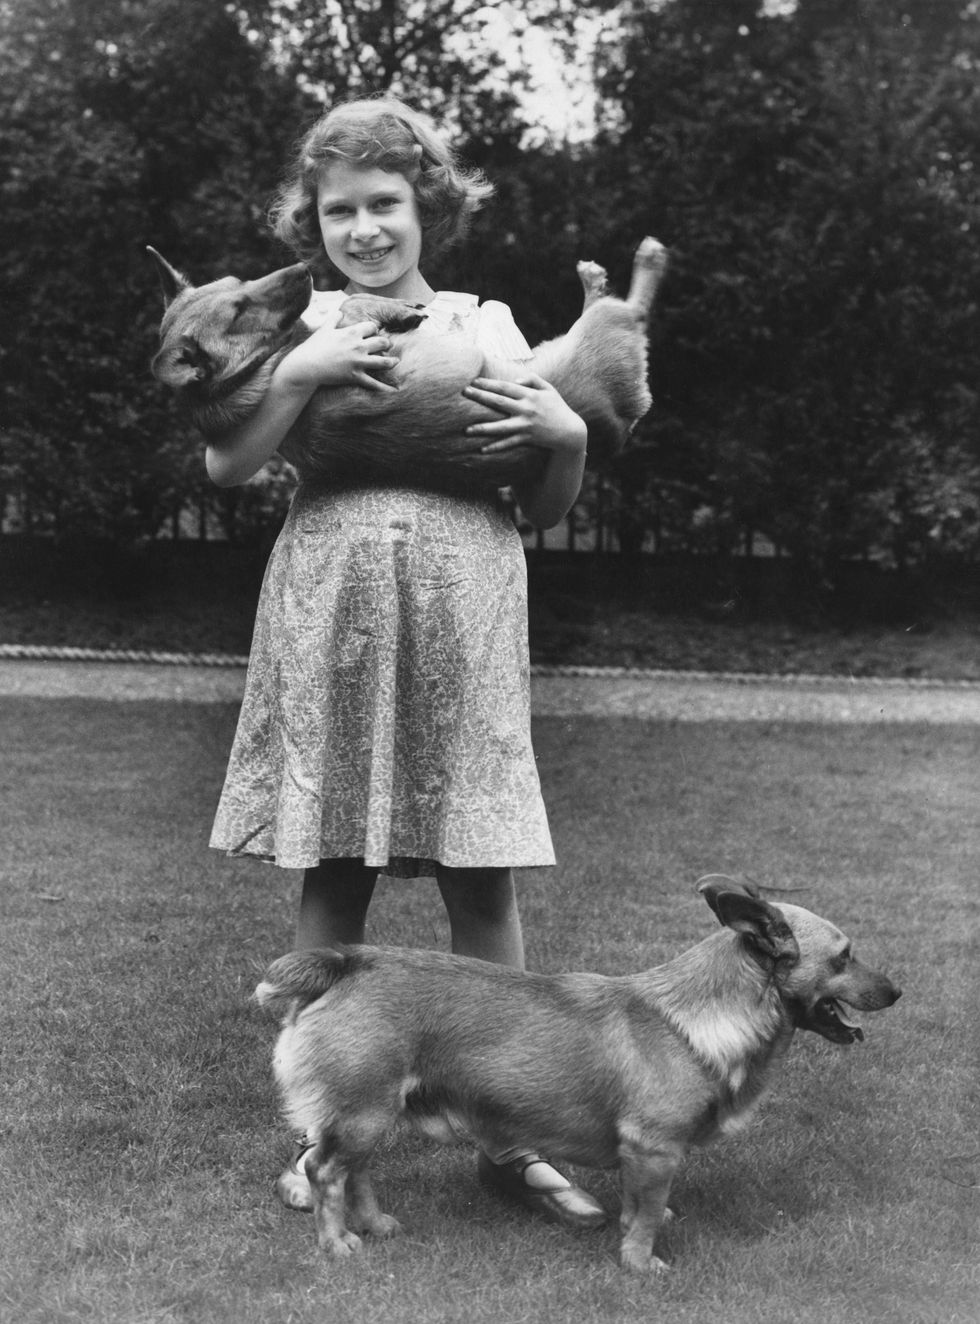 princess elizabeth now queen elizabeth ii with two corgi dogs at her home at 145 piccadilly, london, july 1936 photo by lisa sheridanstudio lisahulton archivegetty images